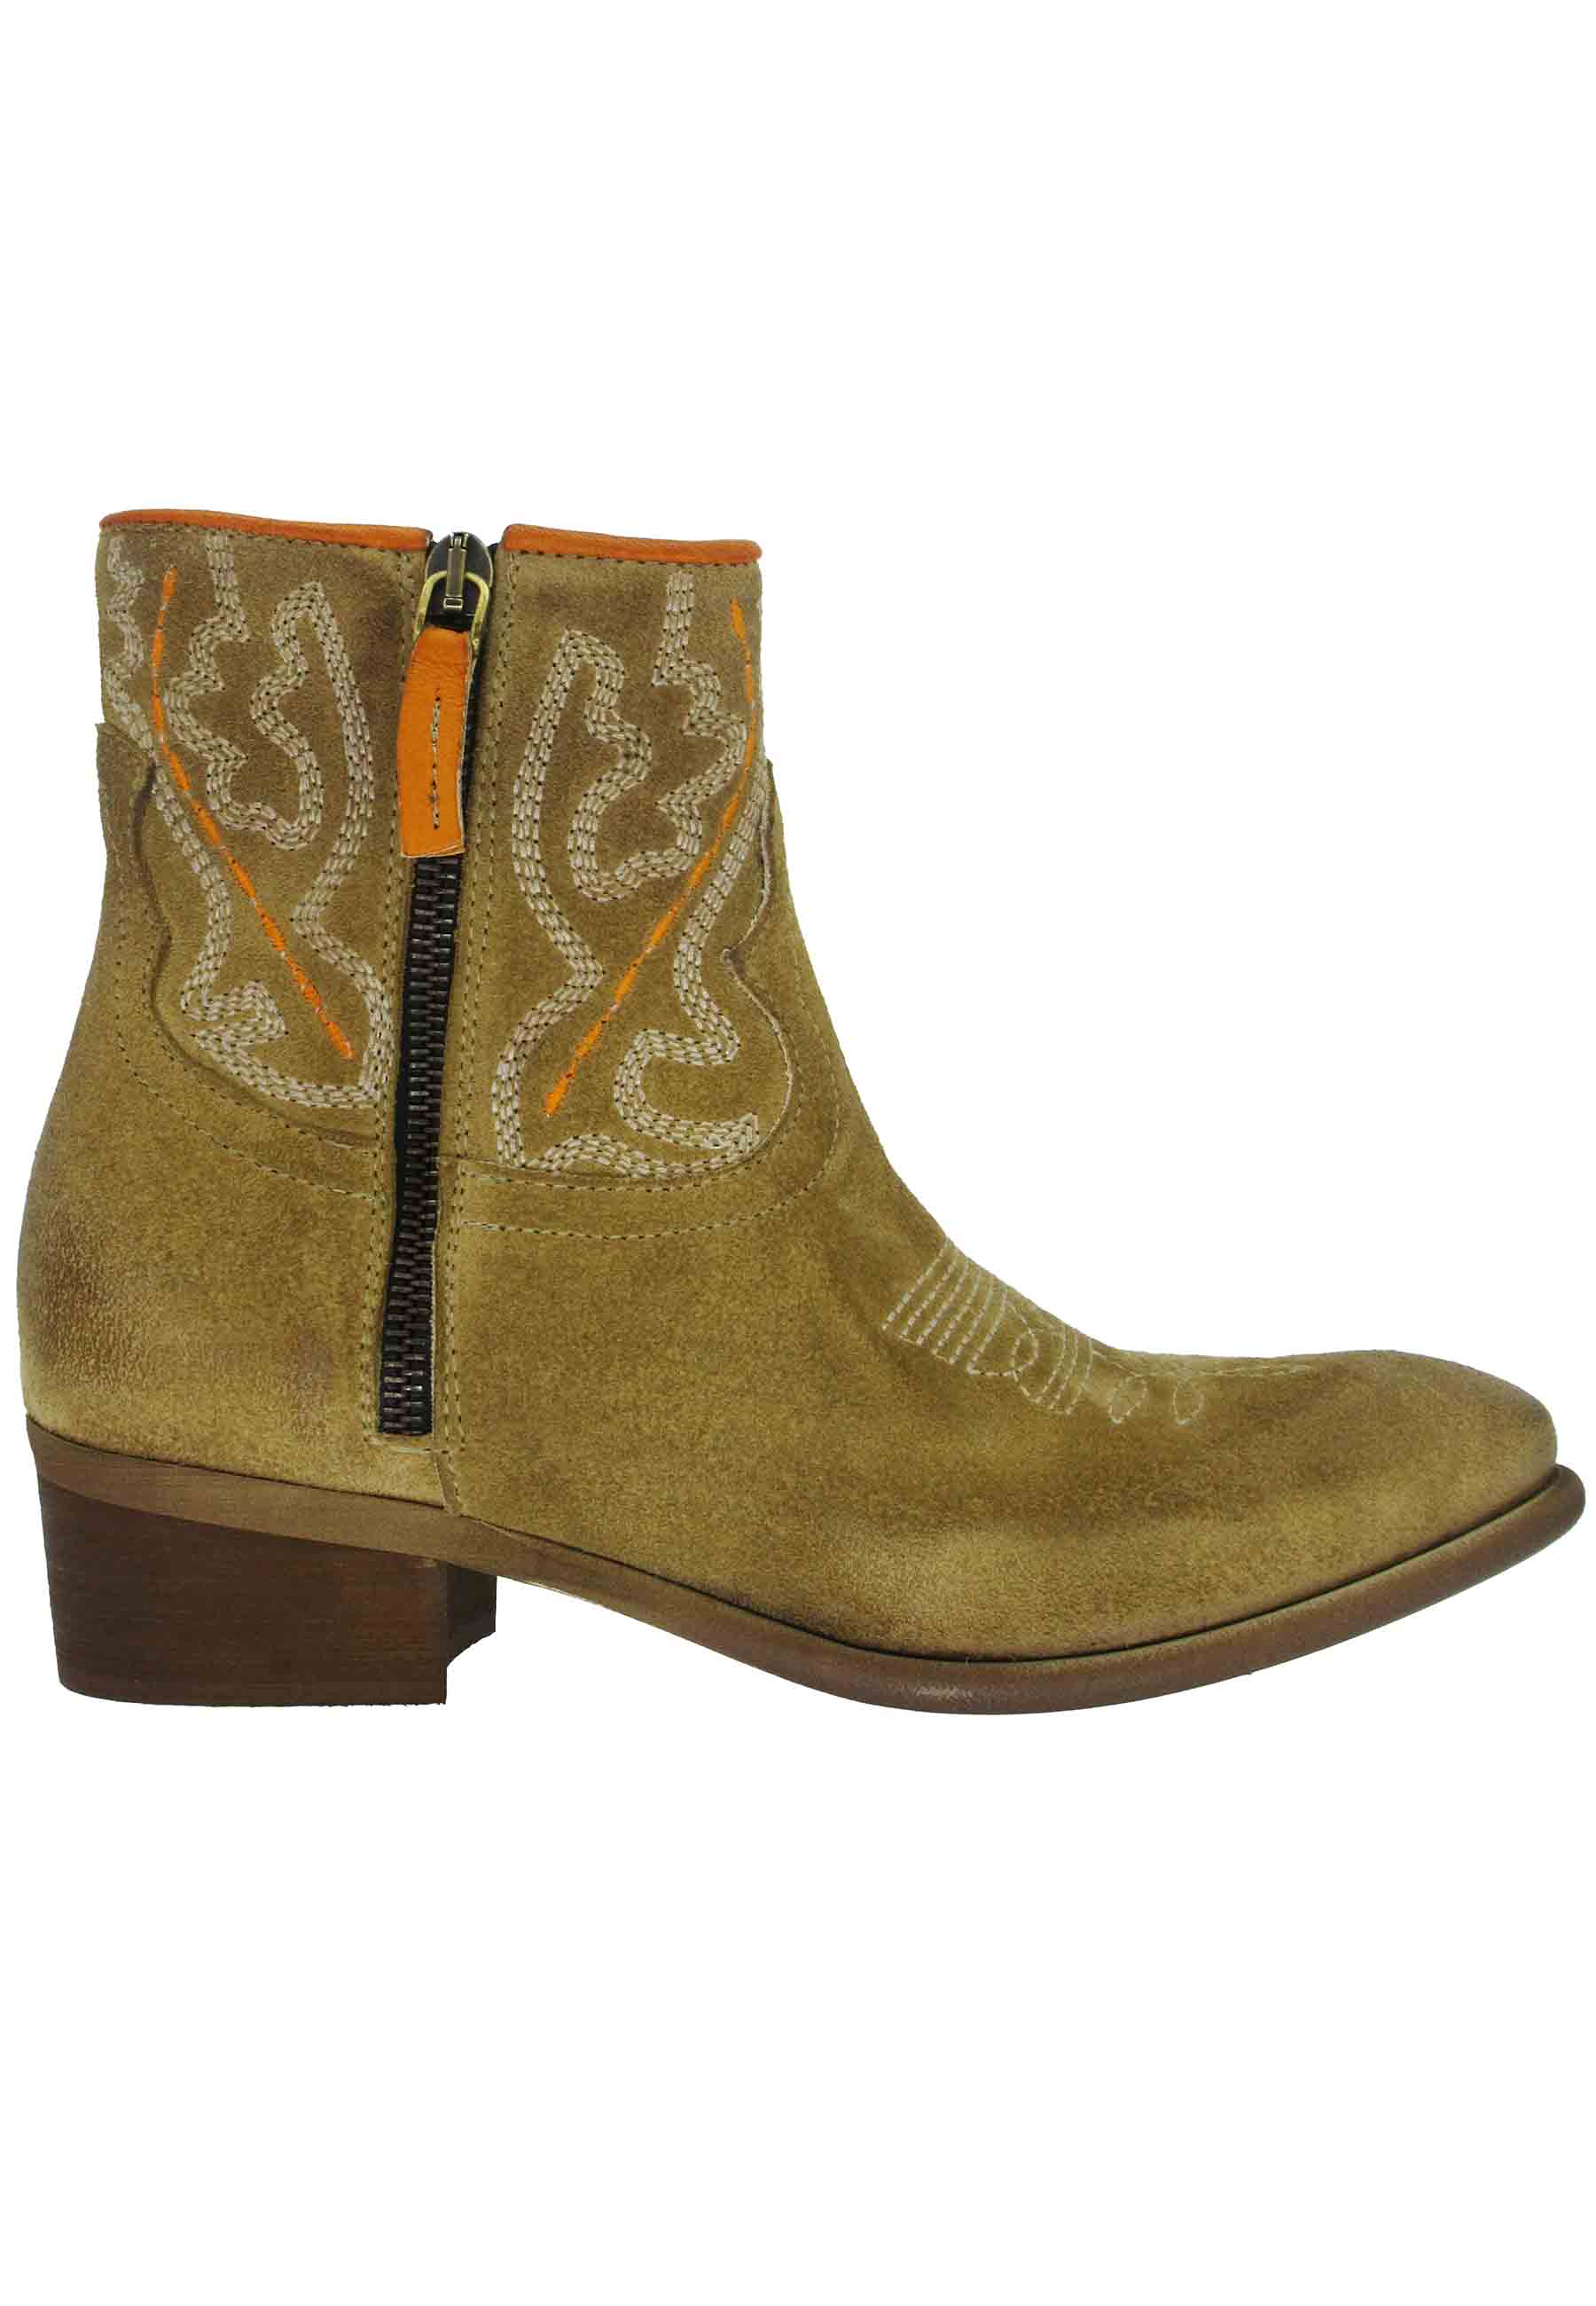 Women's Texan boots in camel suede with stitching